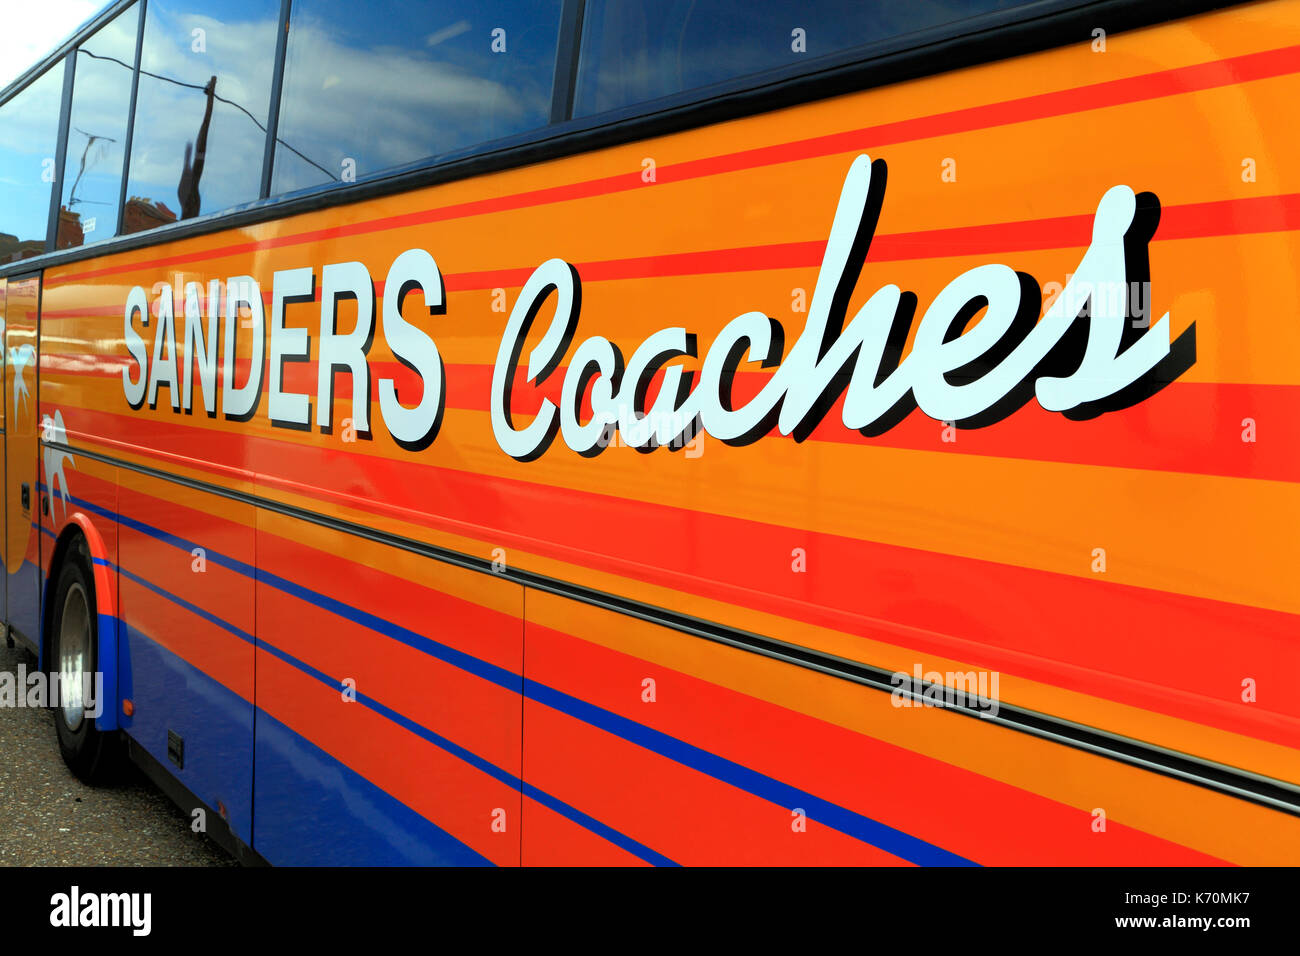 Sanders Coaches, coach, day trips, trip, excursion, excursions, holiday, holidays, travel, transport, England, UK Stock Photo